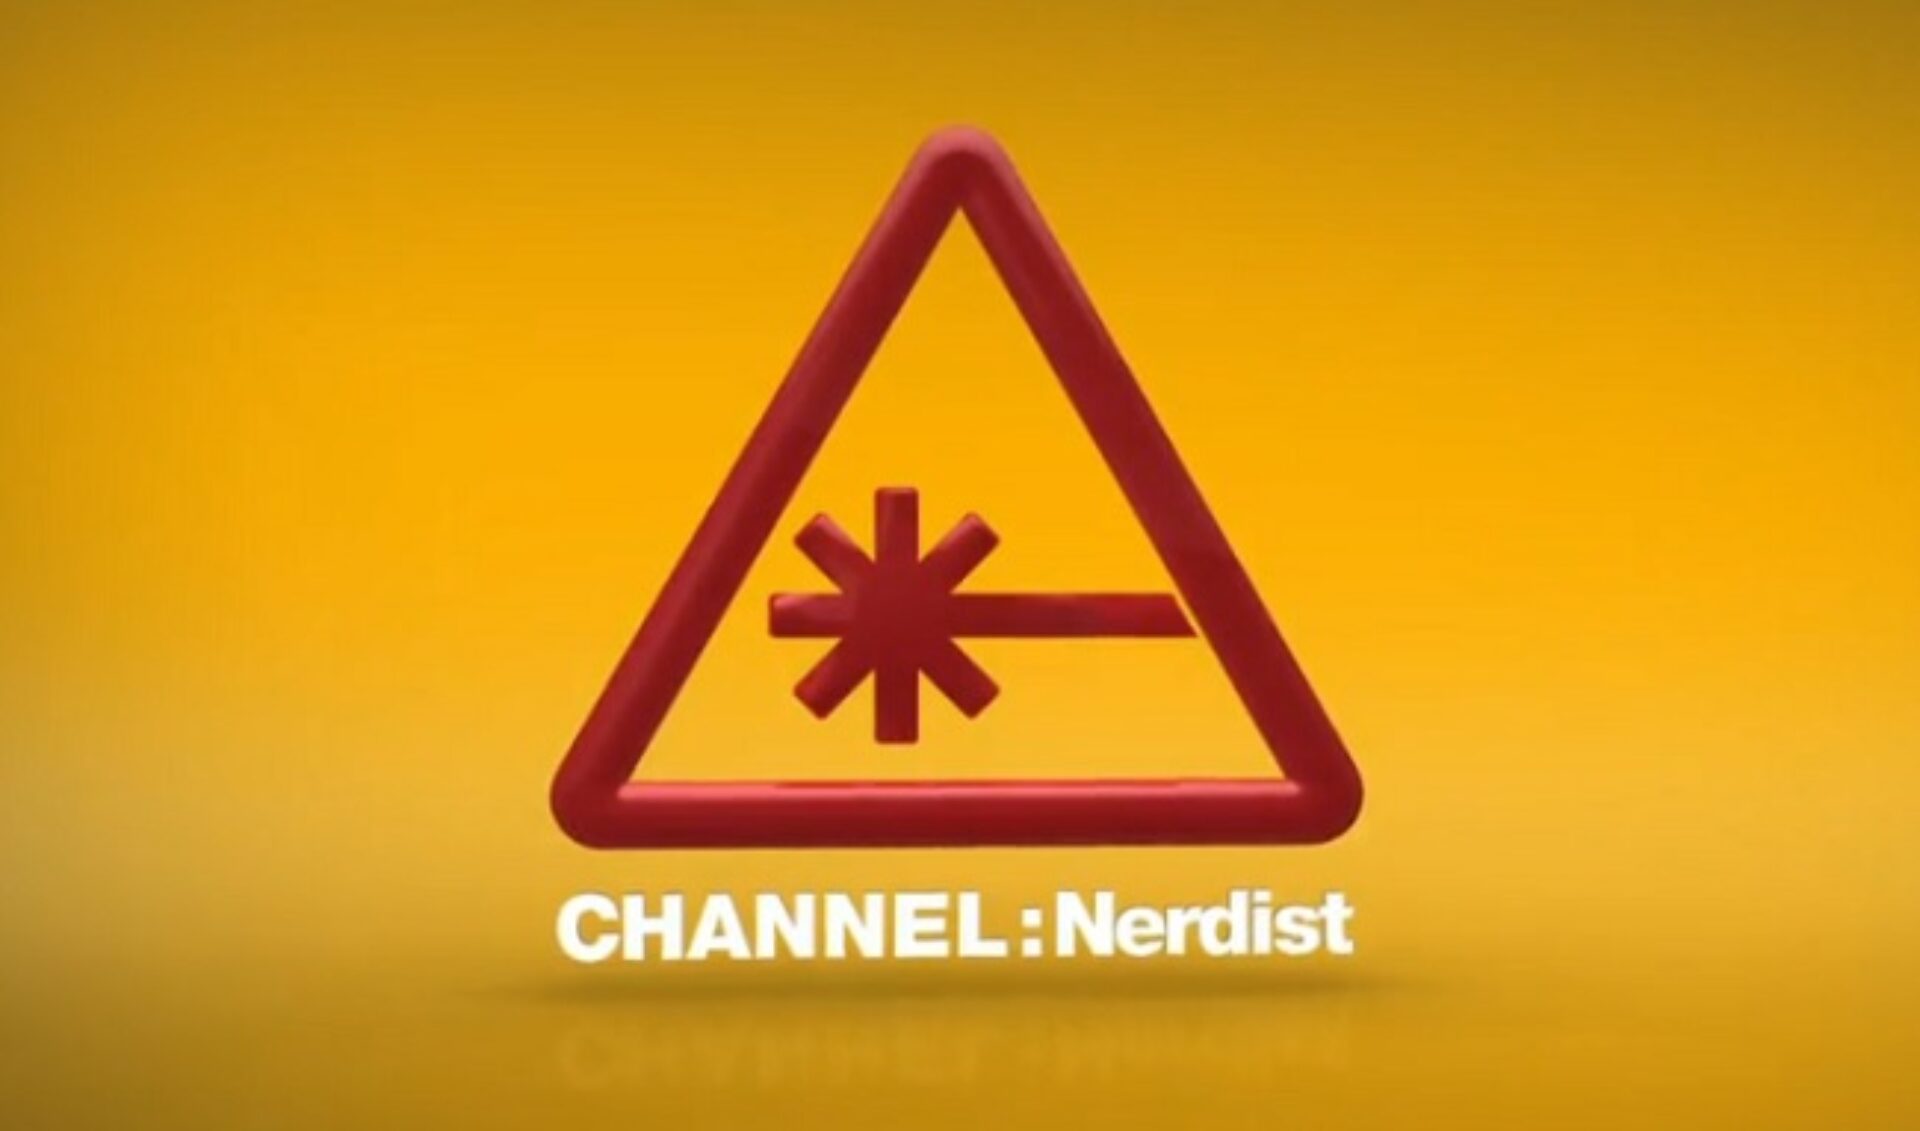 YouTube Millionaires: Nerdist Industries Likes To “Scout” Its Own Path